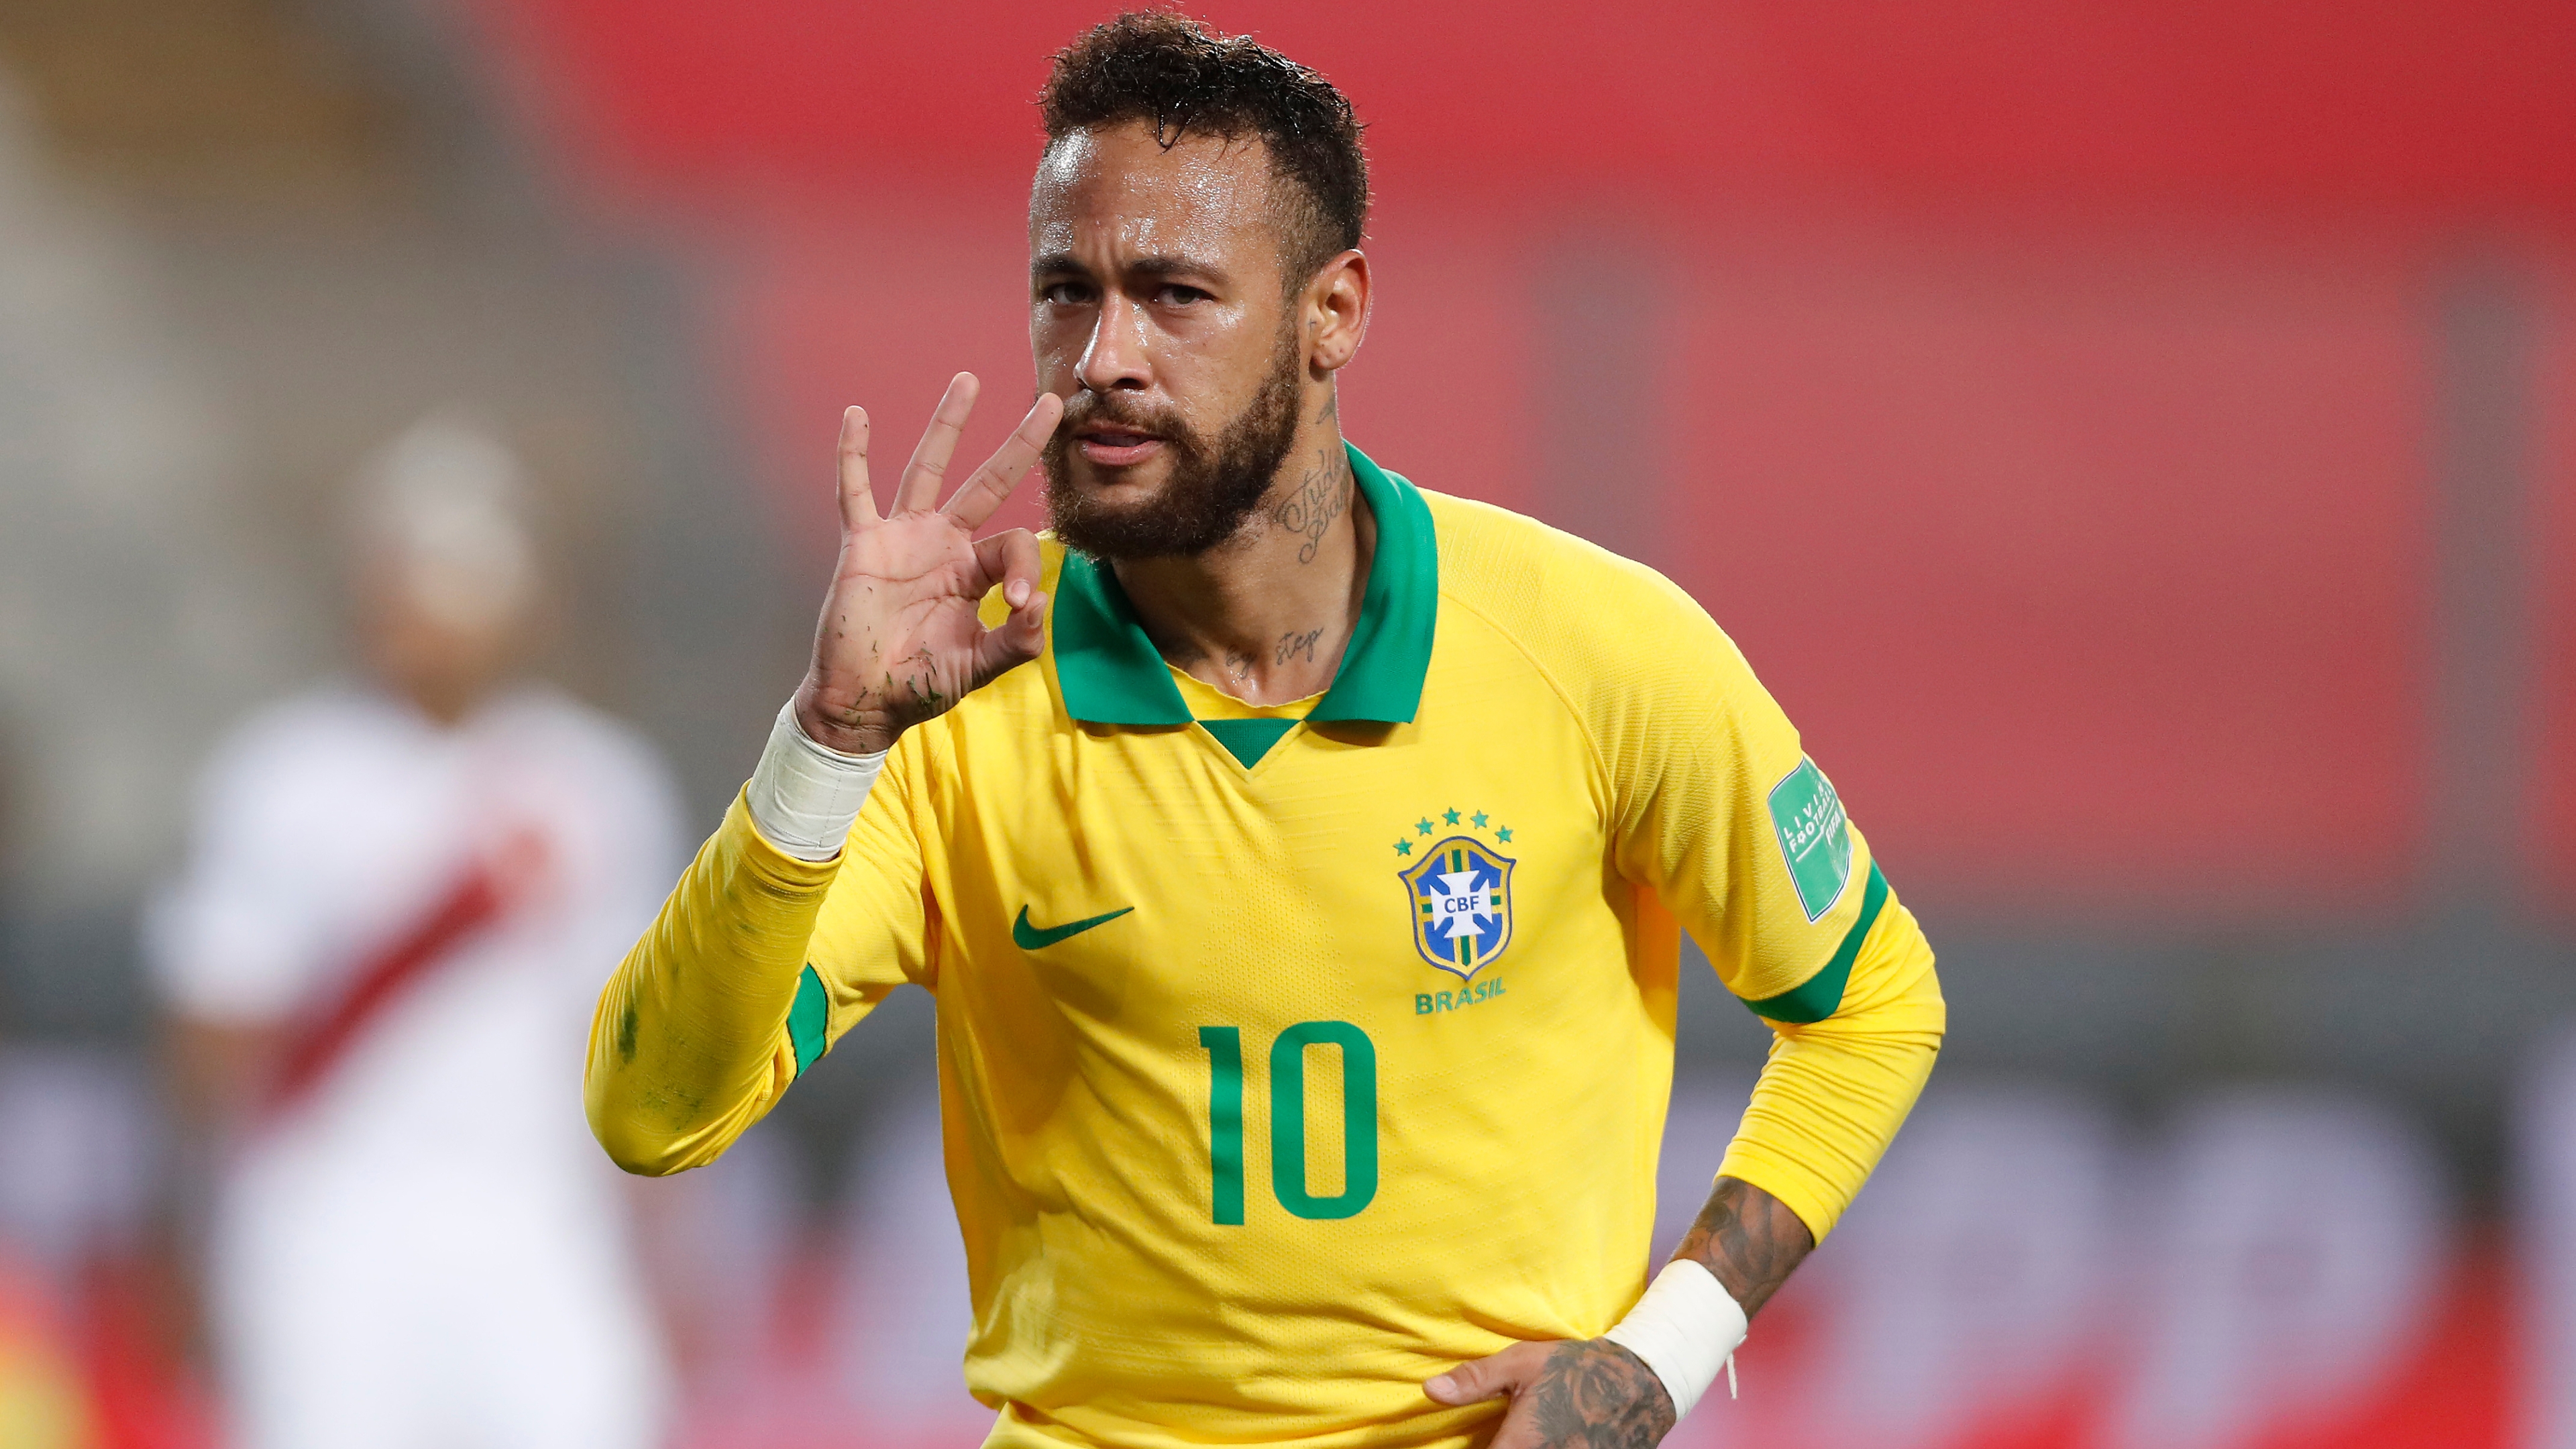 Neymar Told He Is Not Considered A Brazil 'Legend' And Is Only A